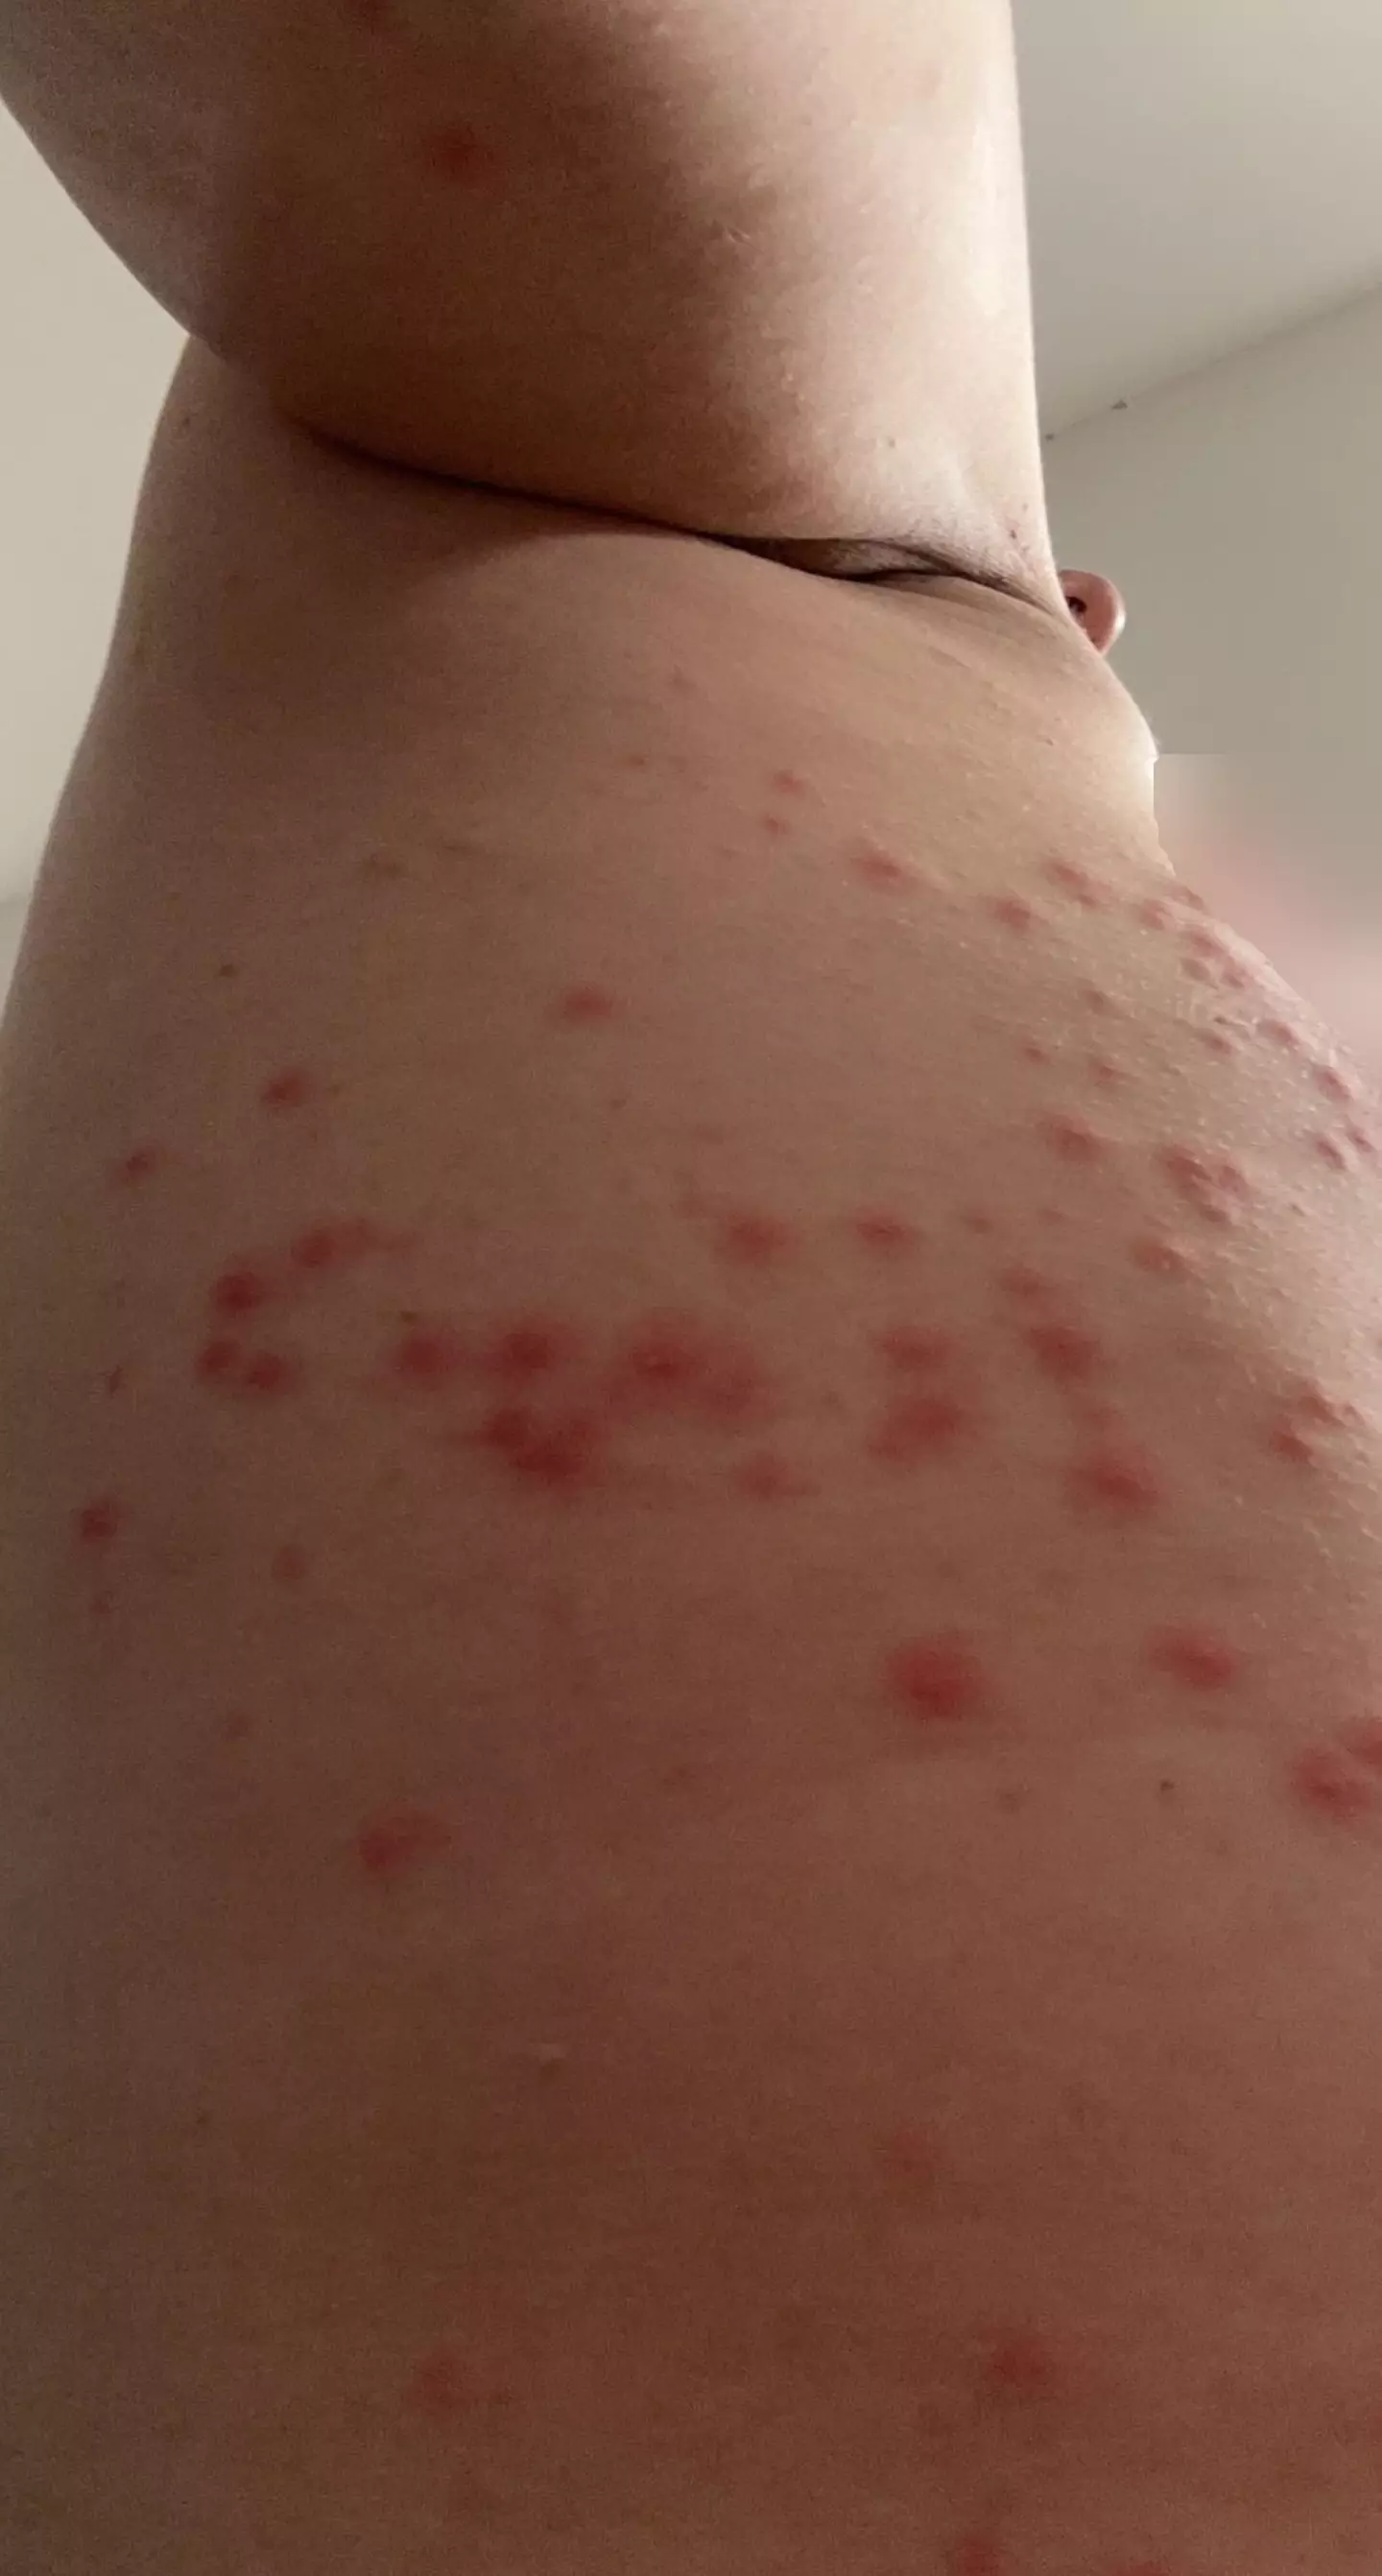 She said she was left with 150 bed bug bites.